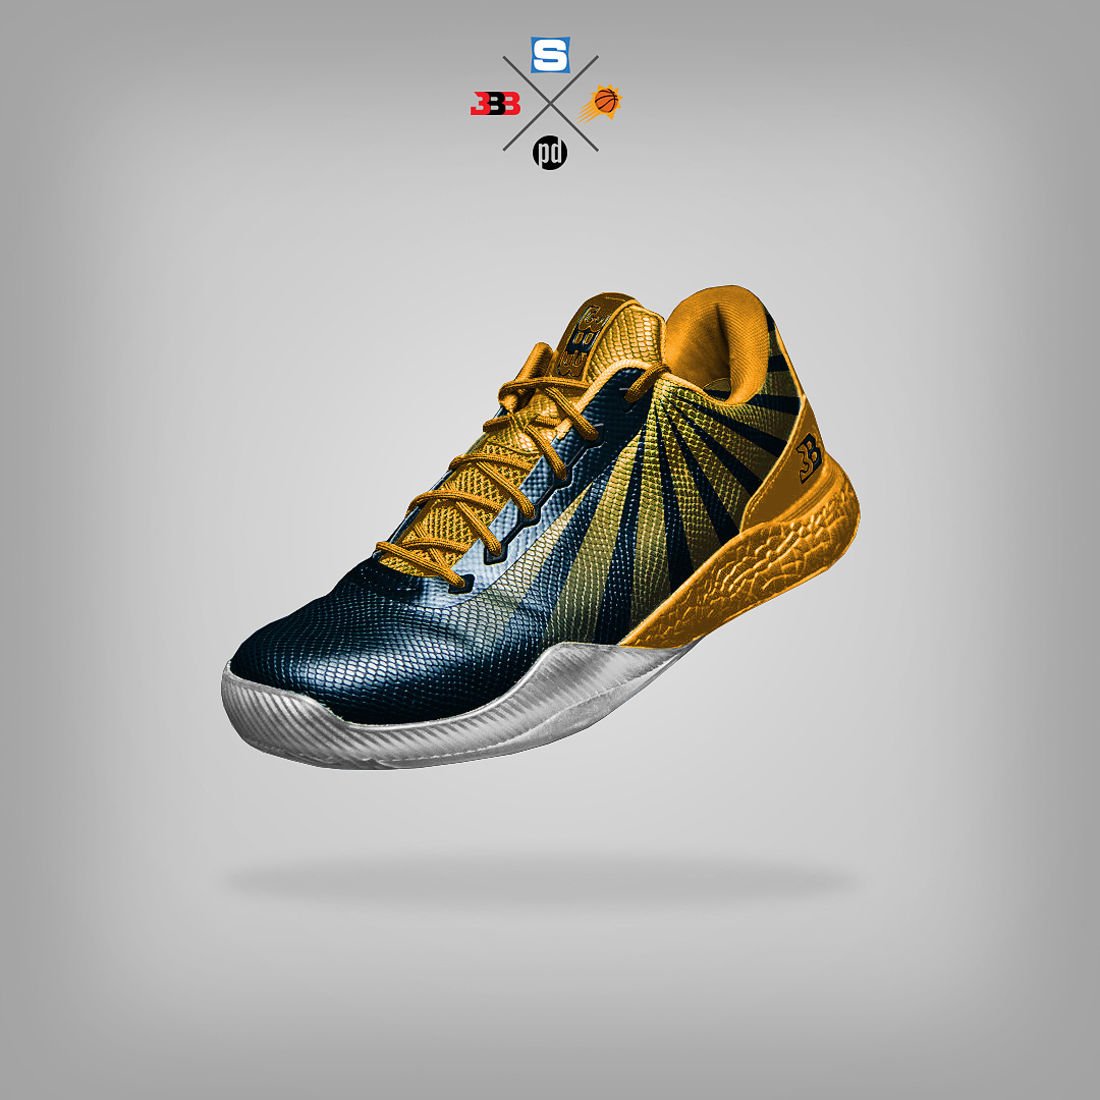 Lonzo Ball Big Baller Brand Sneakers in NBA-Inspired Colorways | Sole Collector1100 x 1100